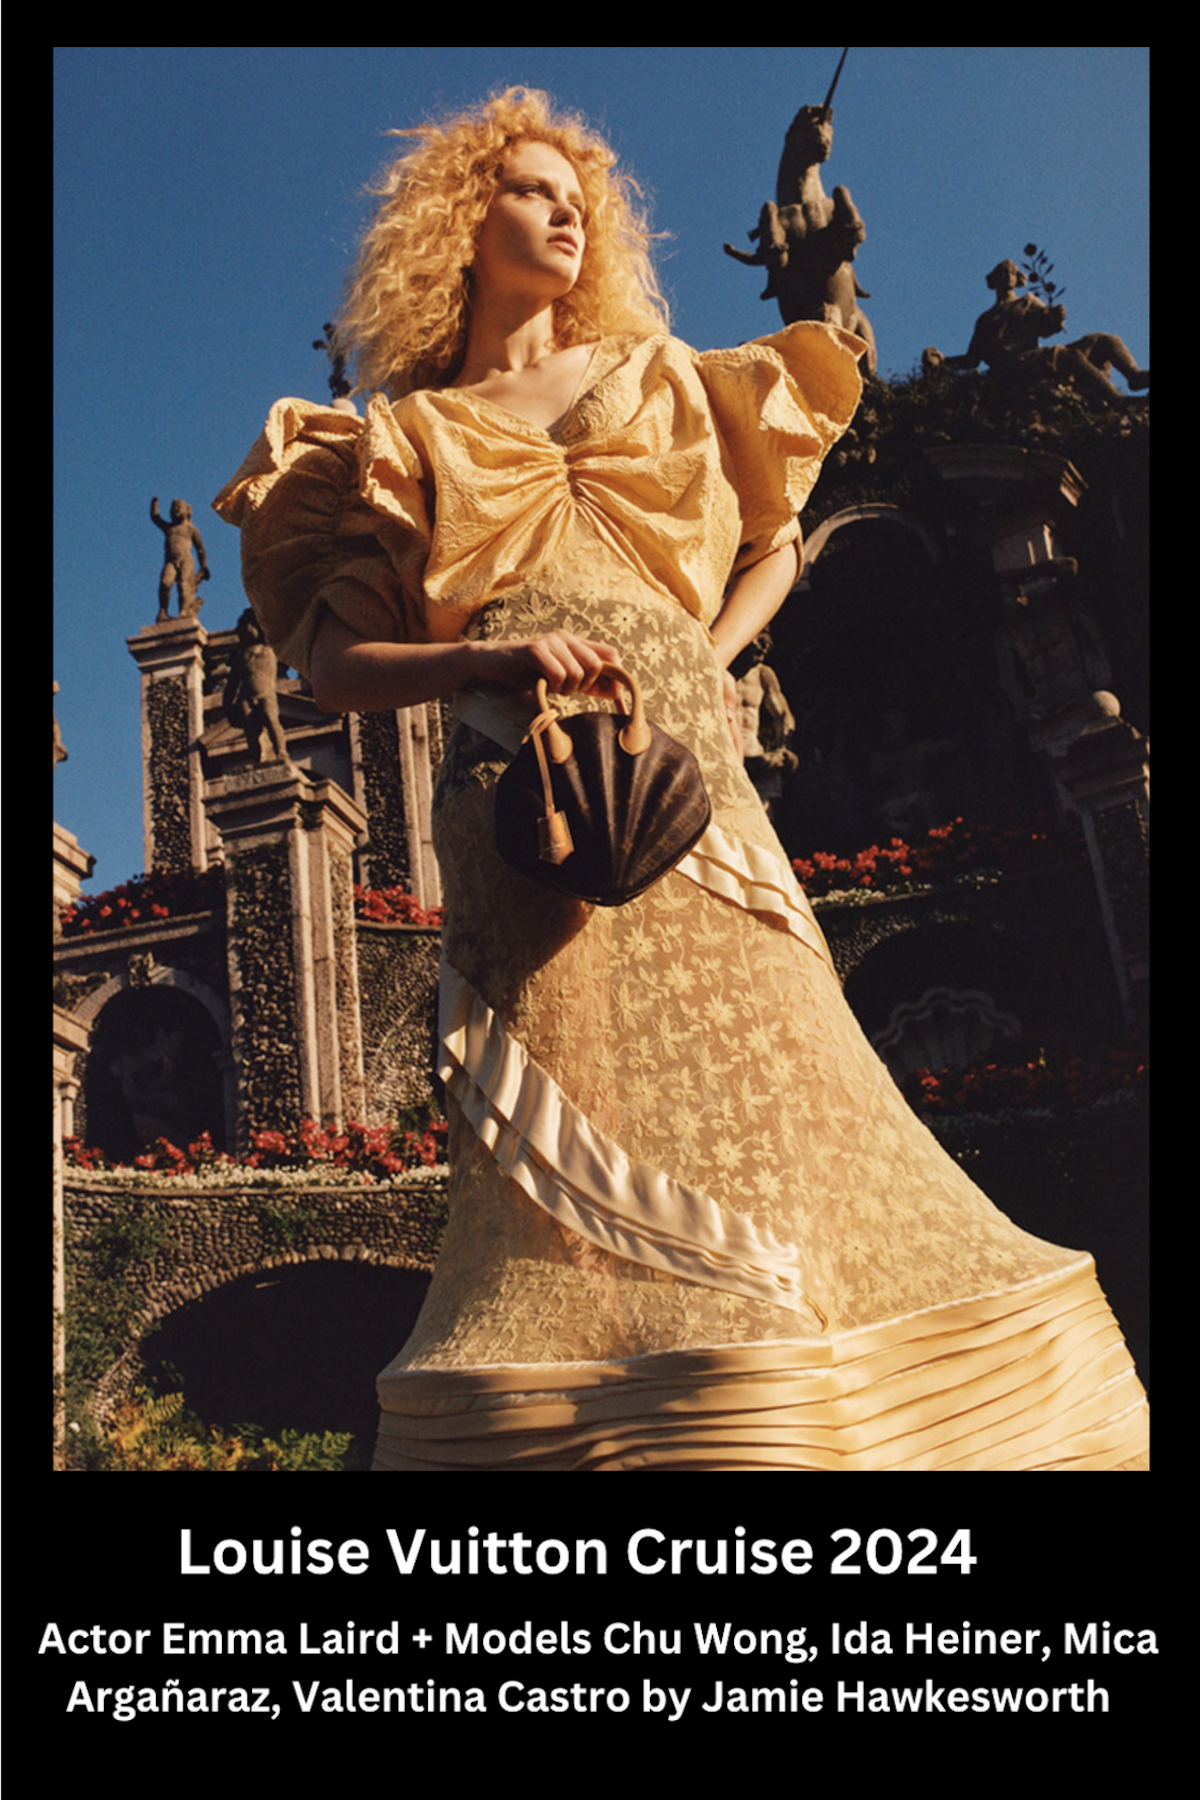 Louis-Vuitton-Cruise-2024-by-Jamie-Hawkesworth-8.png